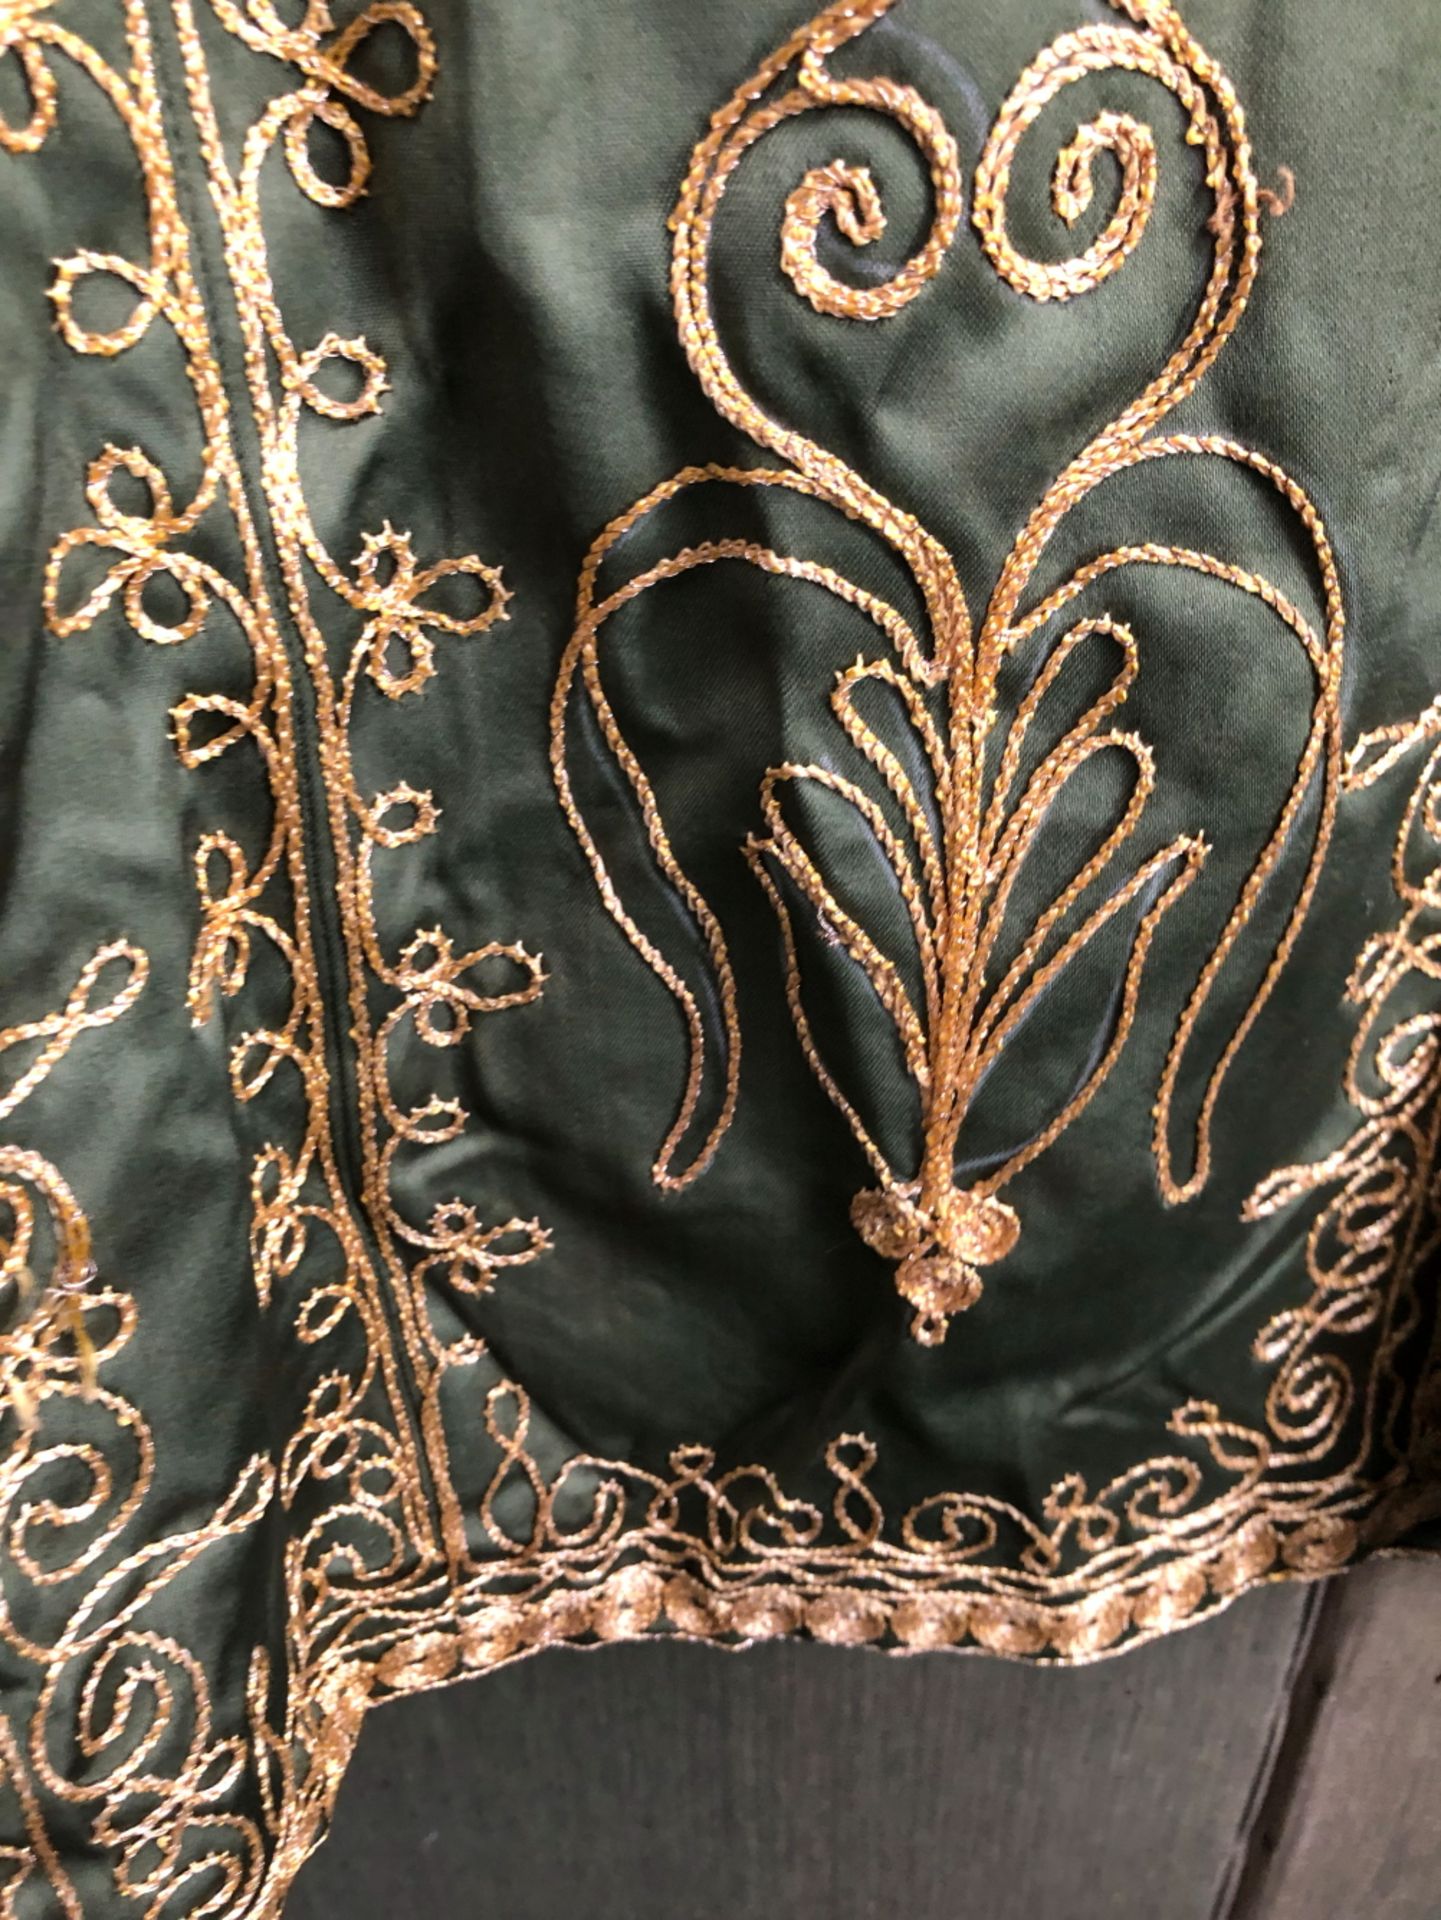 JACKET, AN INDIAN GREEN SILK JACKET EMBROIDERED IN GOLD THREAD, SLEEVE LENGTH 48cms, NECK TO HEM - Image 5 of 10